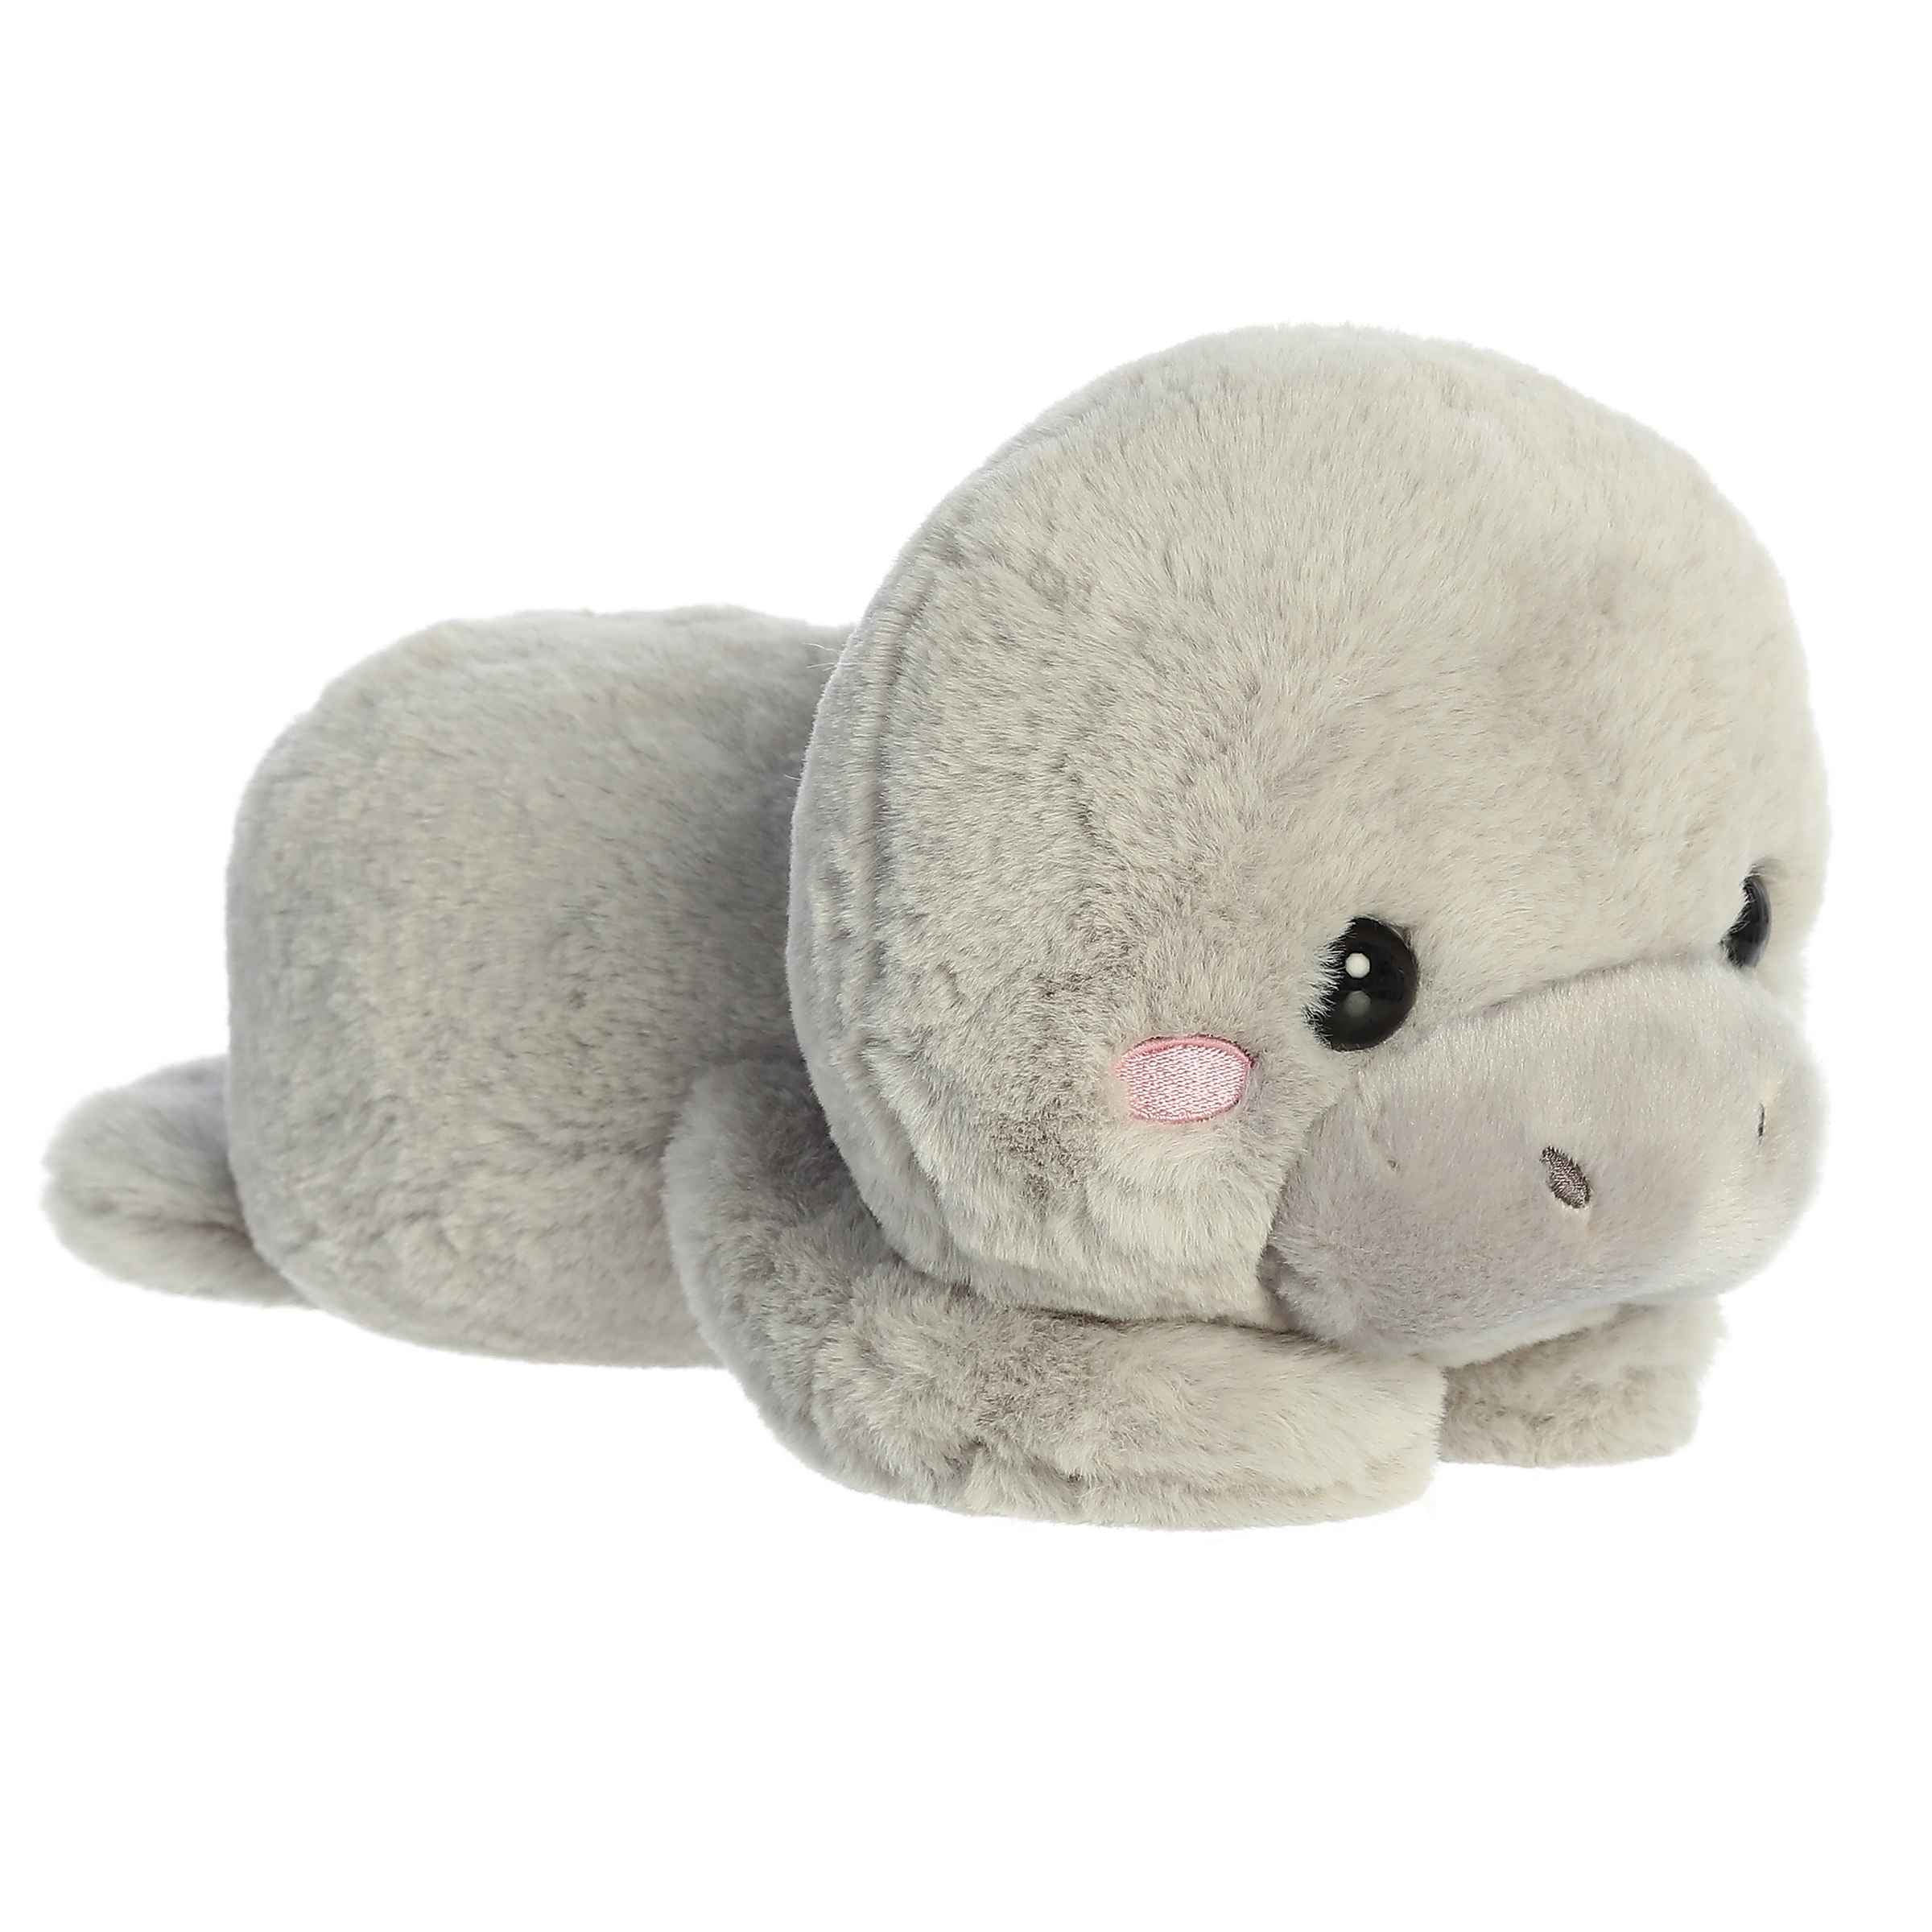 Millie Manatee plush from Too Cute Collection, soft gray tones, inviting for snuggles